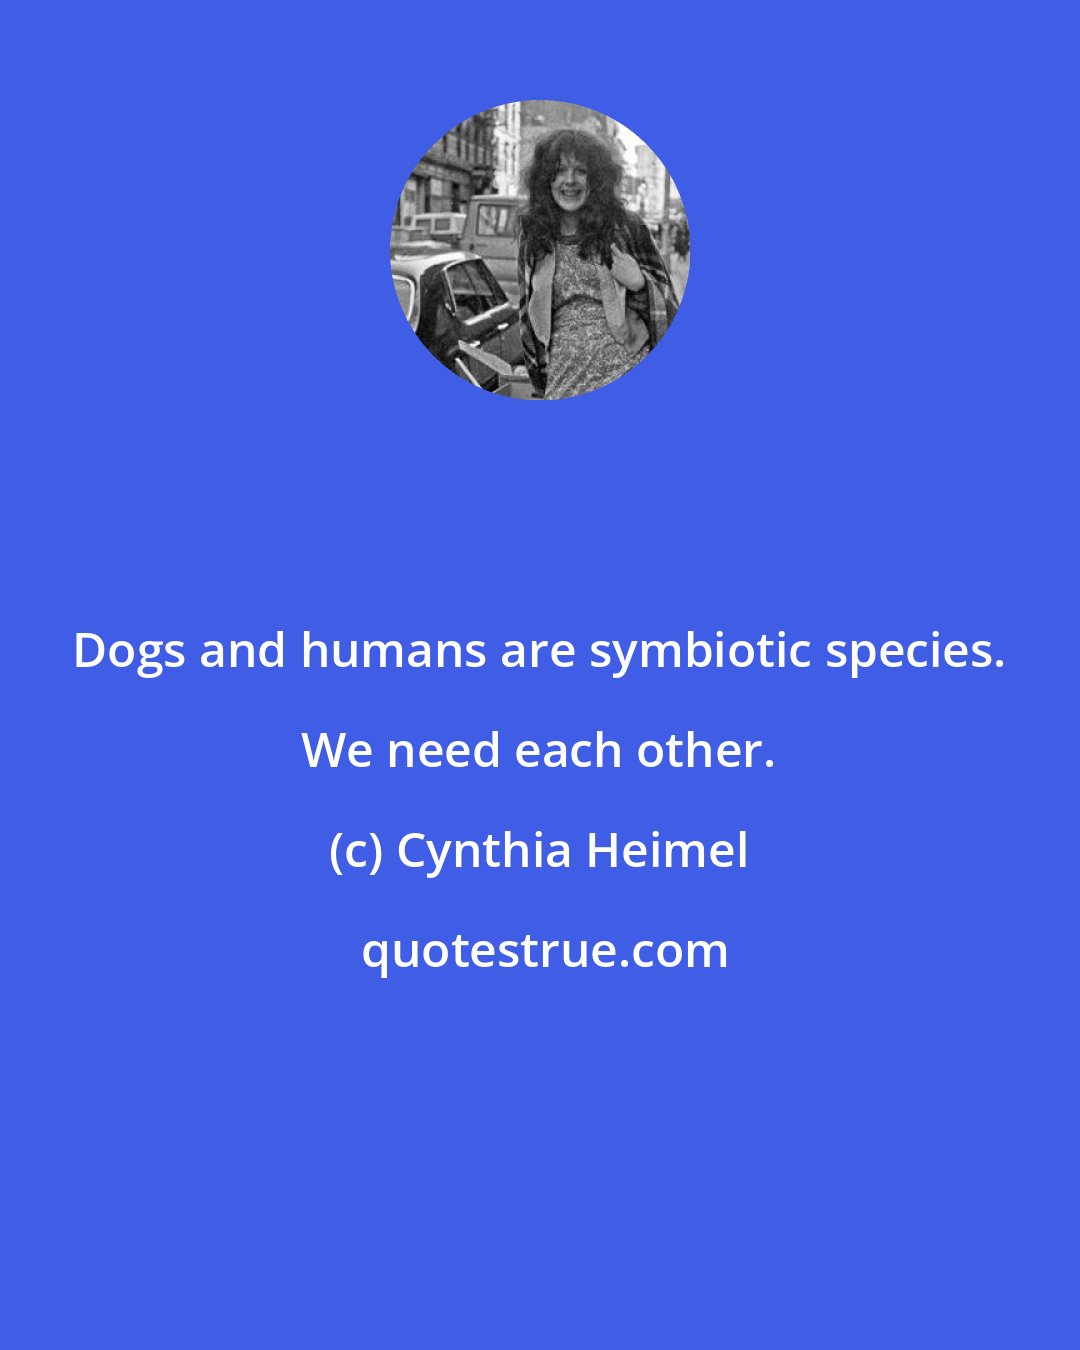 Cynthia Heimel: Dogs and humans are symbiotic species. We need each other.